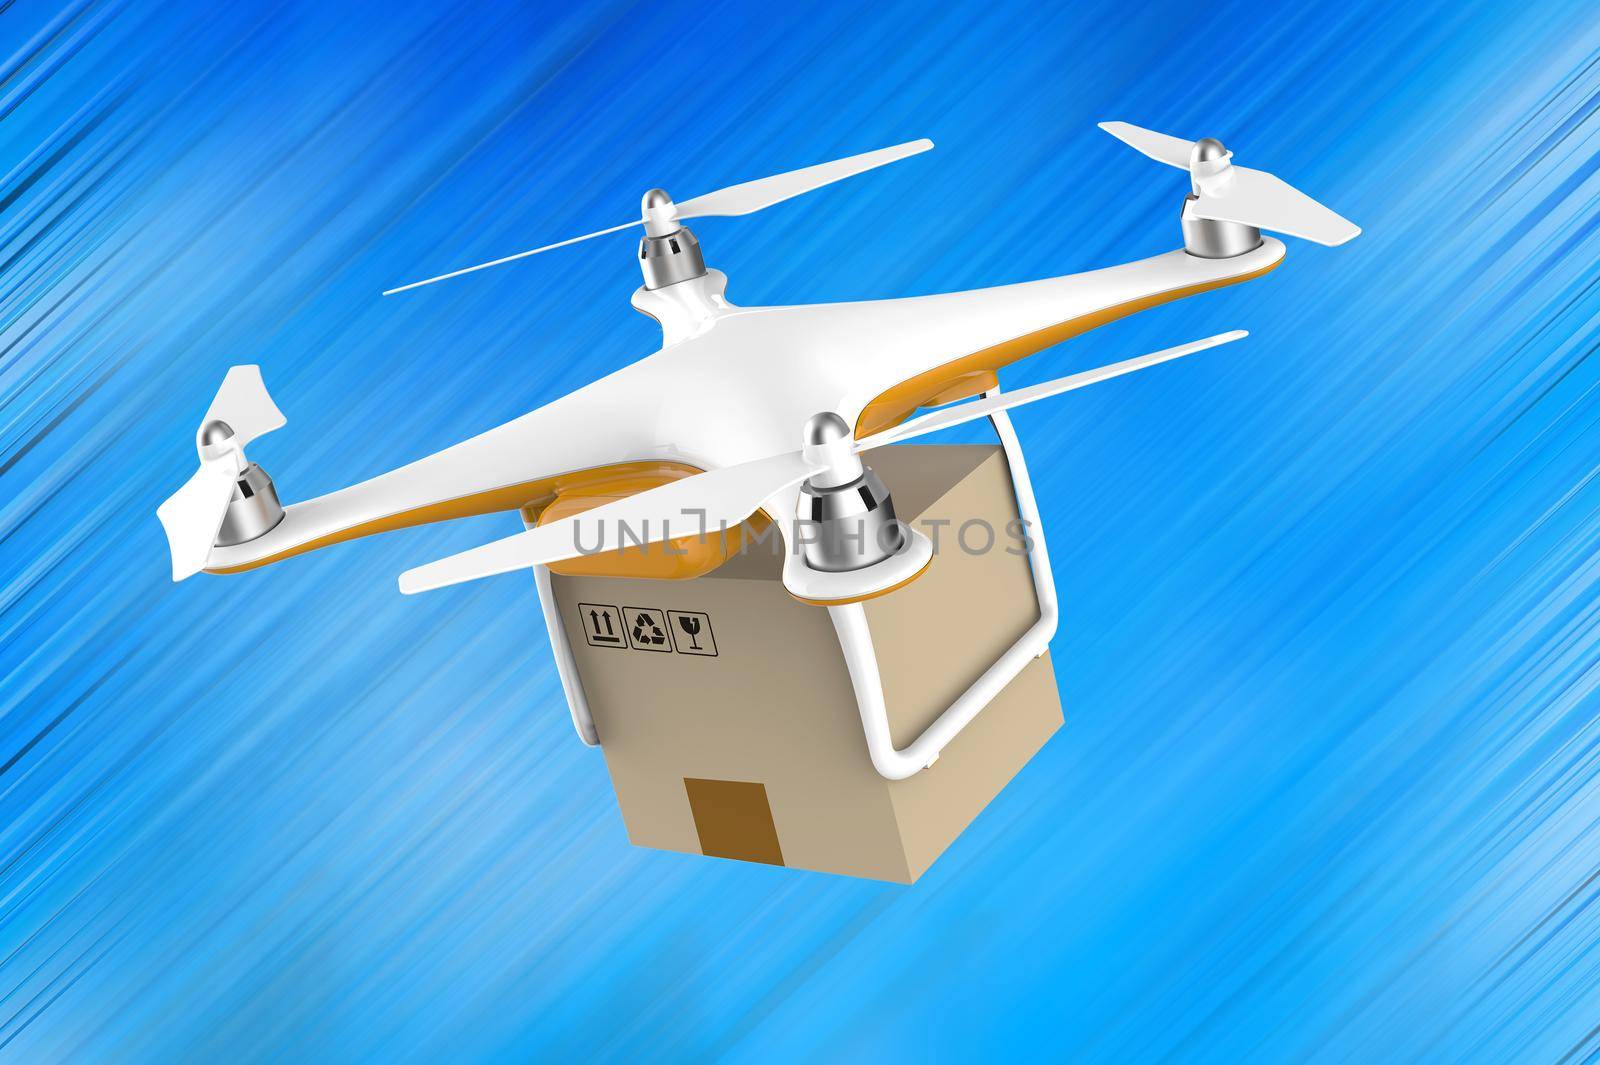 Drone flying with a delivery box package on a blue background by cla78